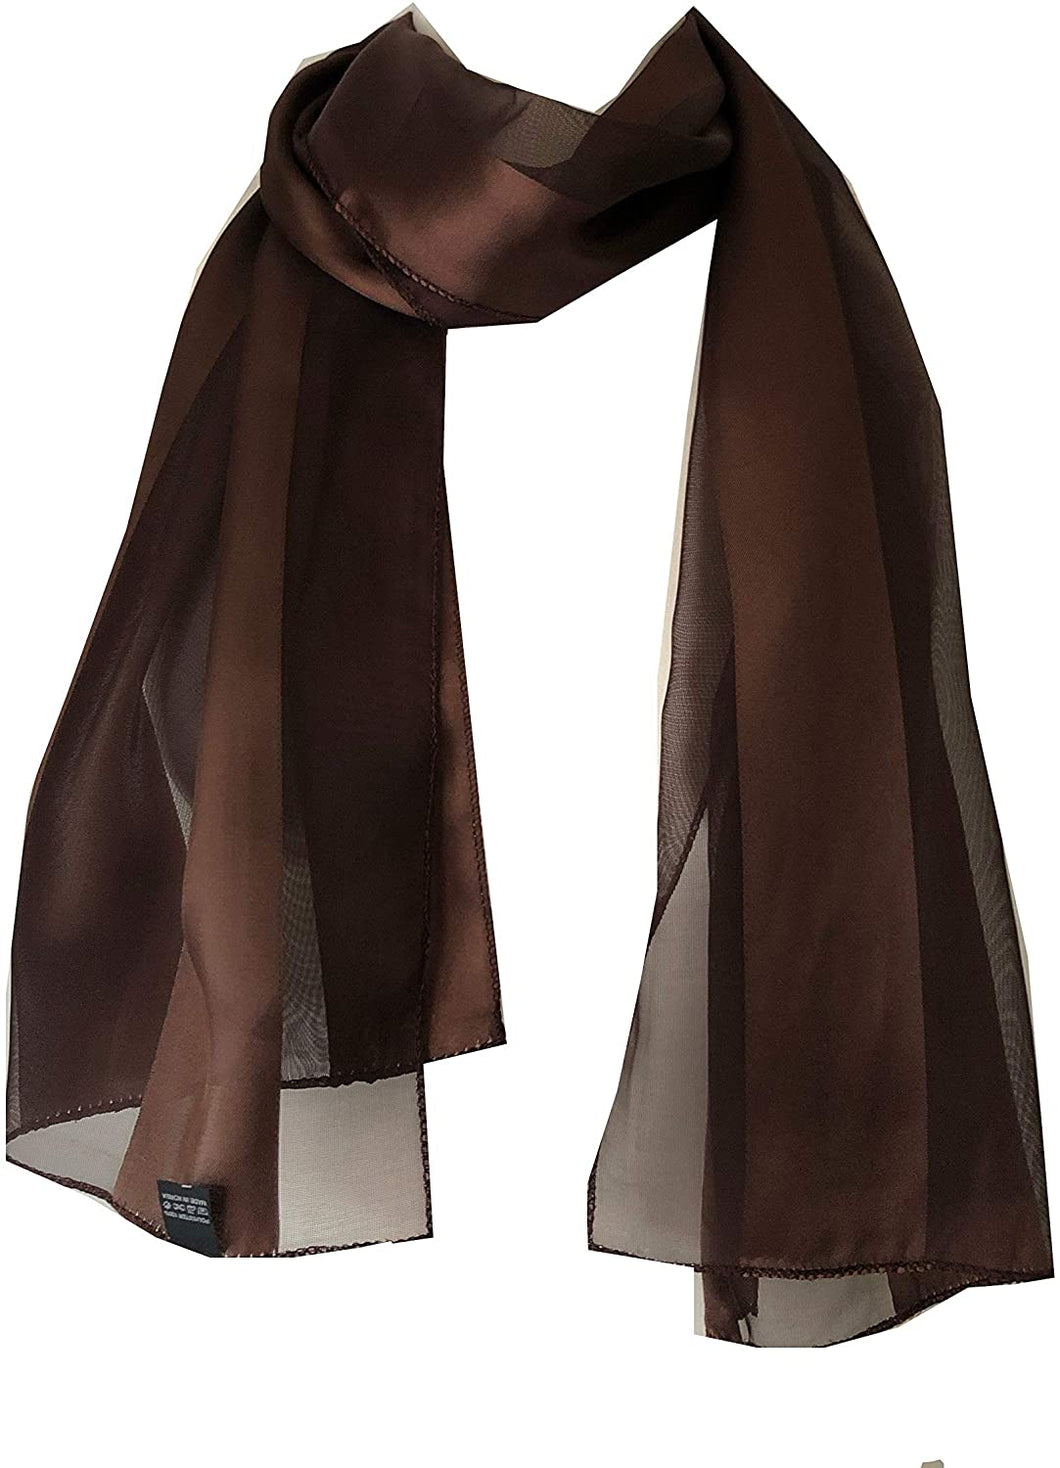 Plain Dark Brown Faux Chiffon and Satin Style Striped Scarf Thin Pretty Scarf Great for Any Outfit